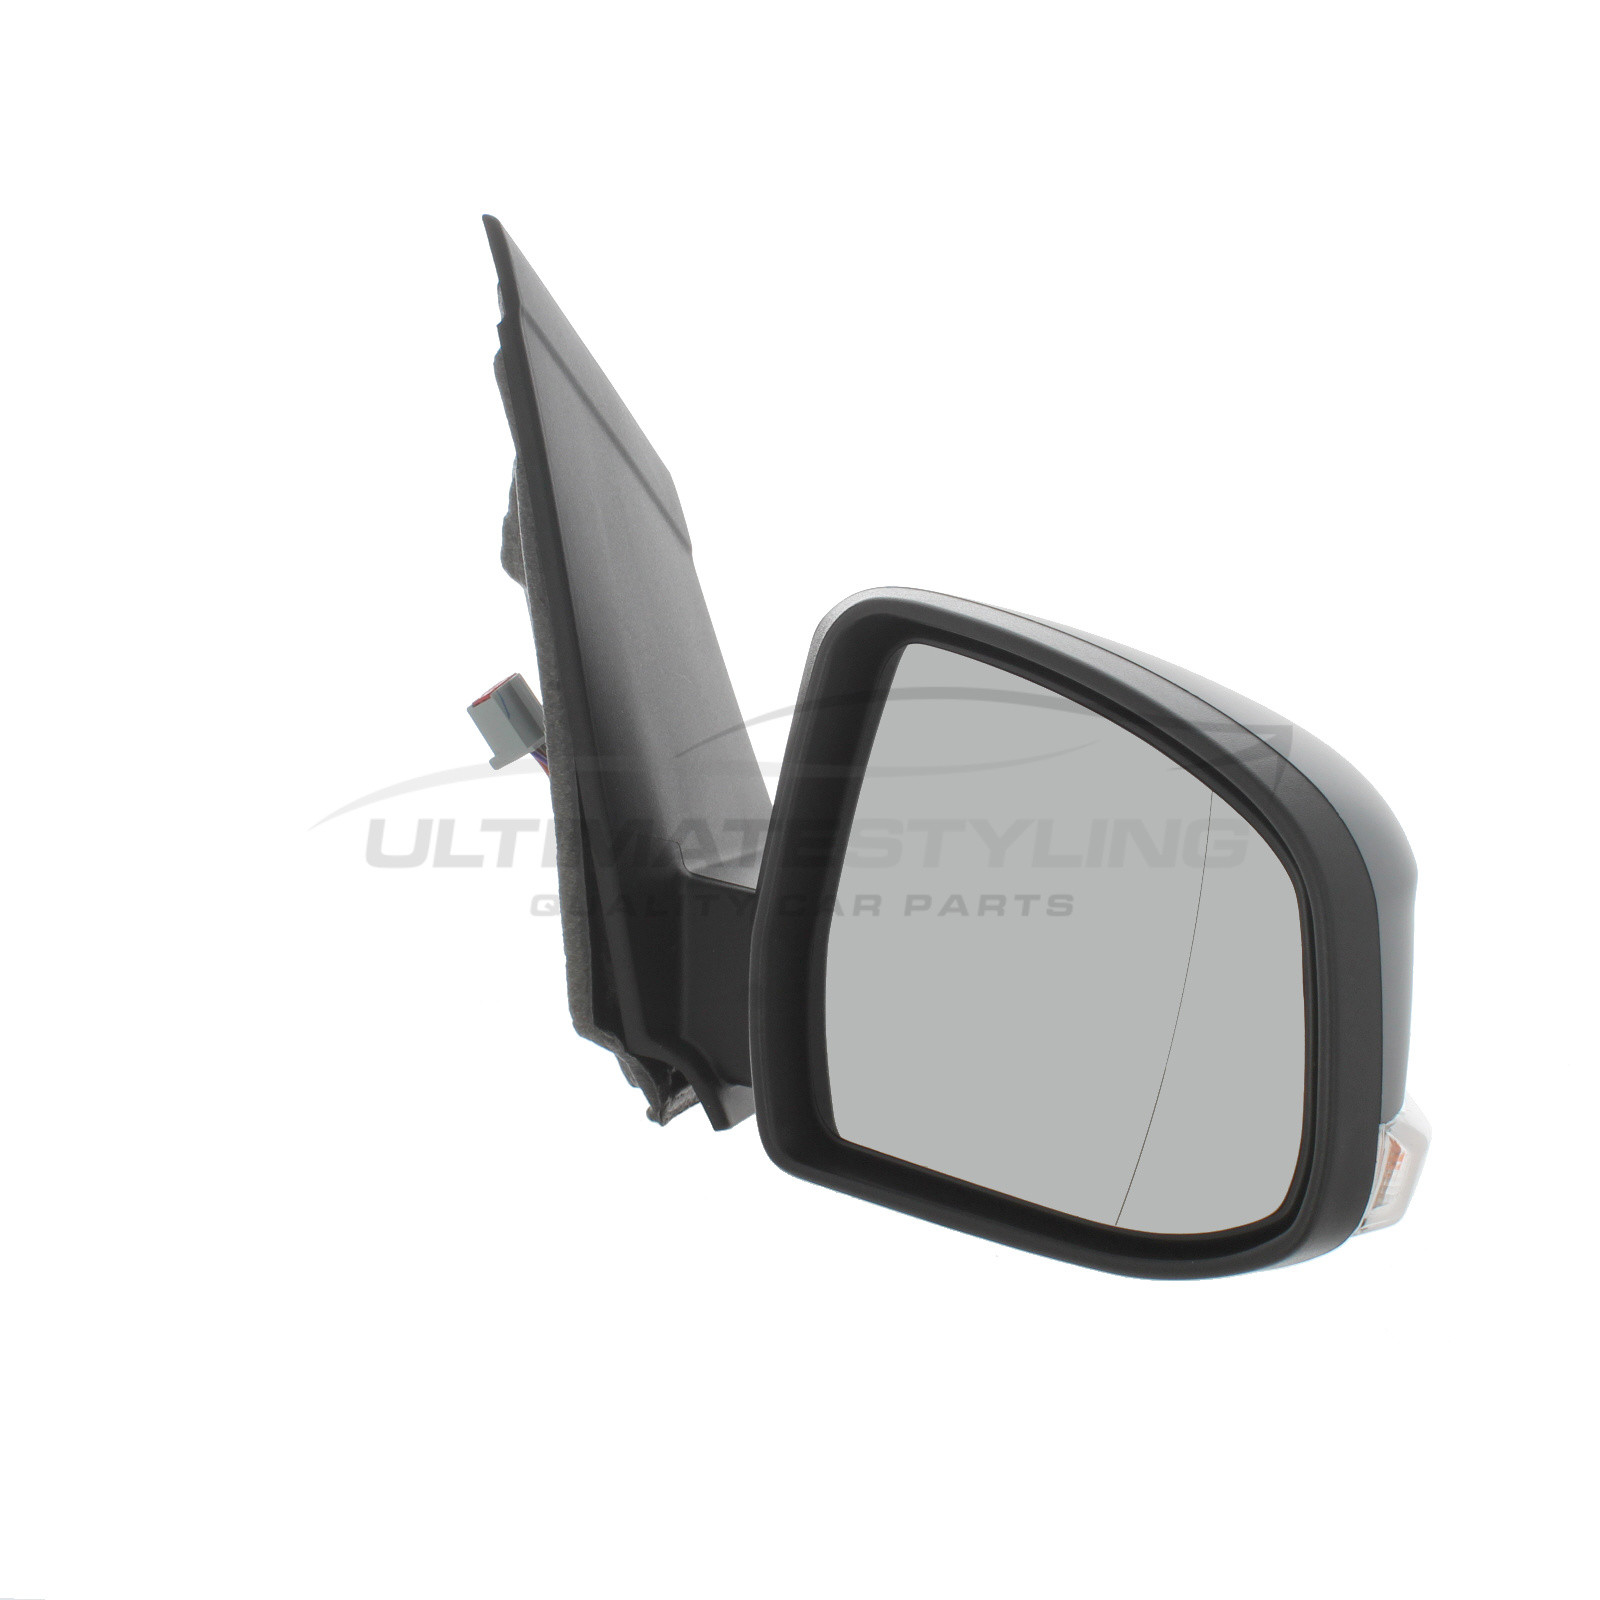 Elu Ford Focus 2005 Right  electric wing mirror E9014292 RMG2712 